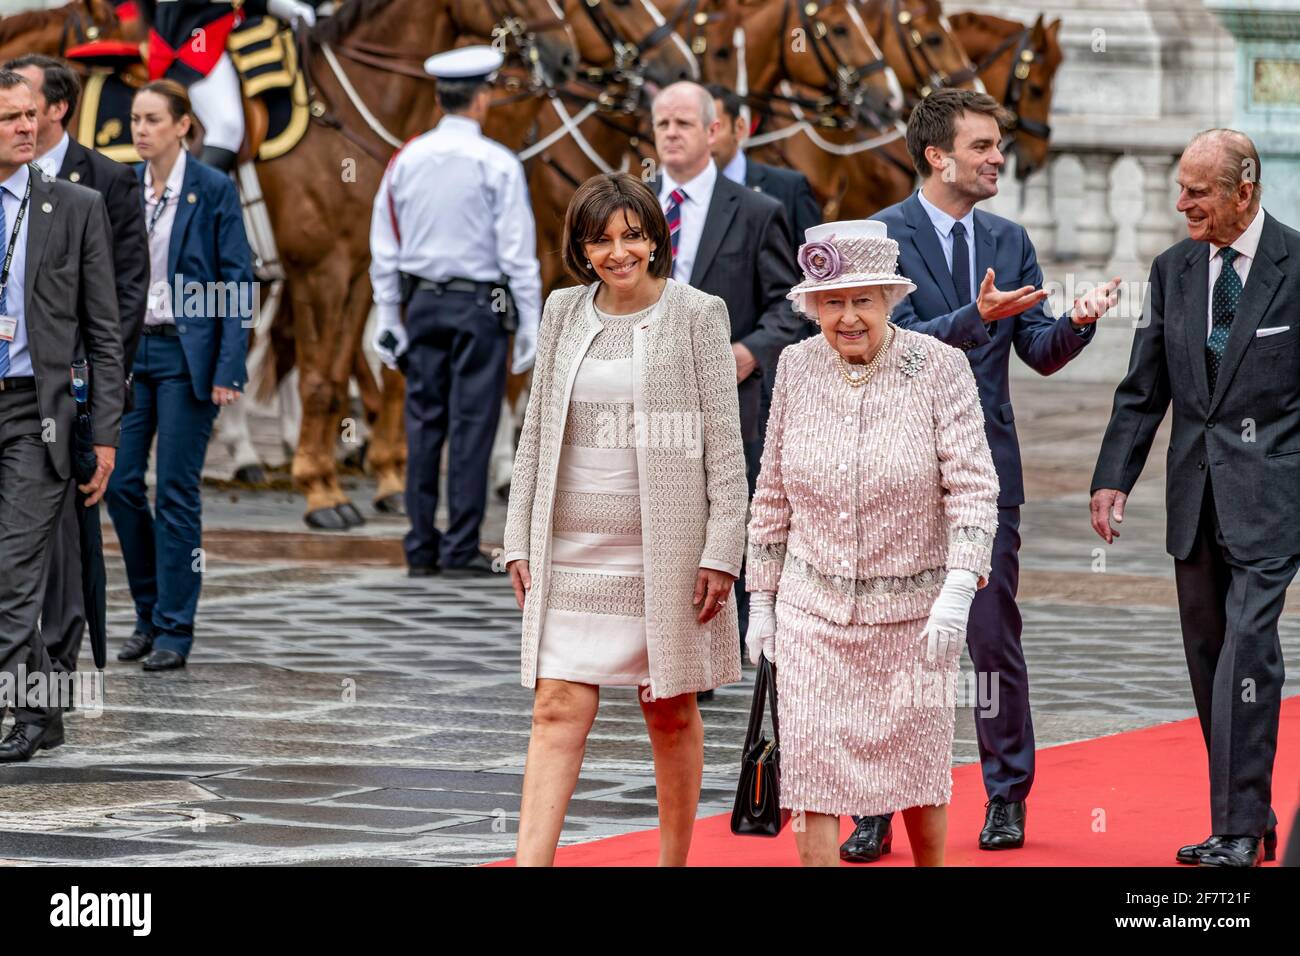 Paris, France. 7th June, 2014. Queen Elizabeth II accompanied by Prince Philip is the host of the City of Paris for the last day of her state visit. Stock Photo